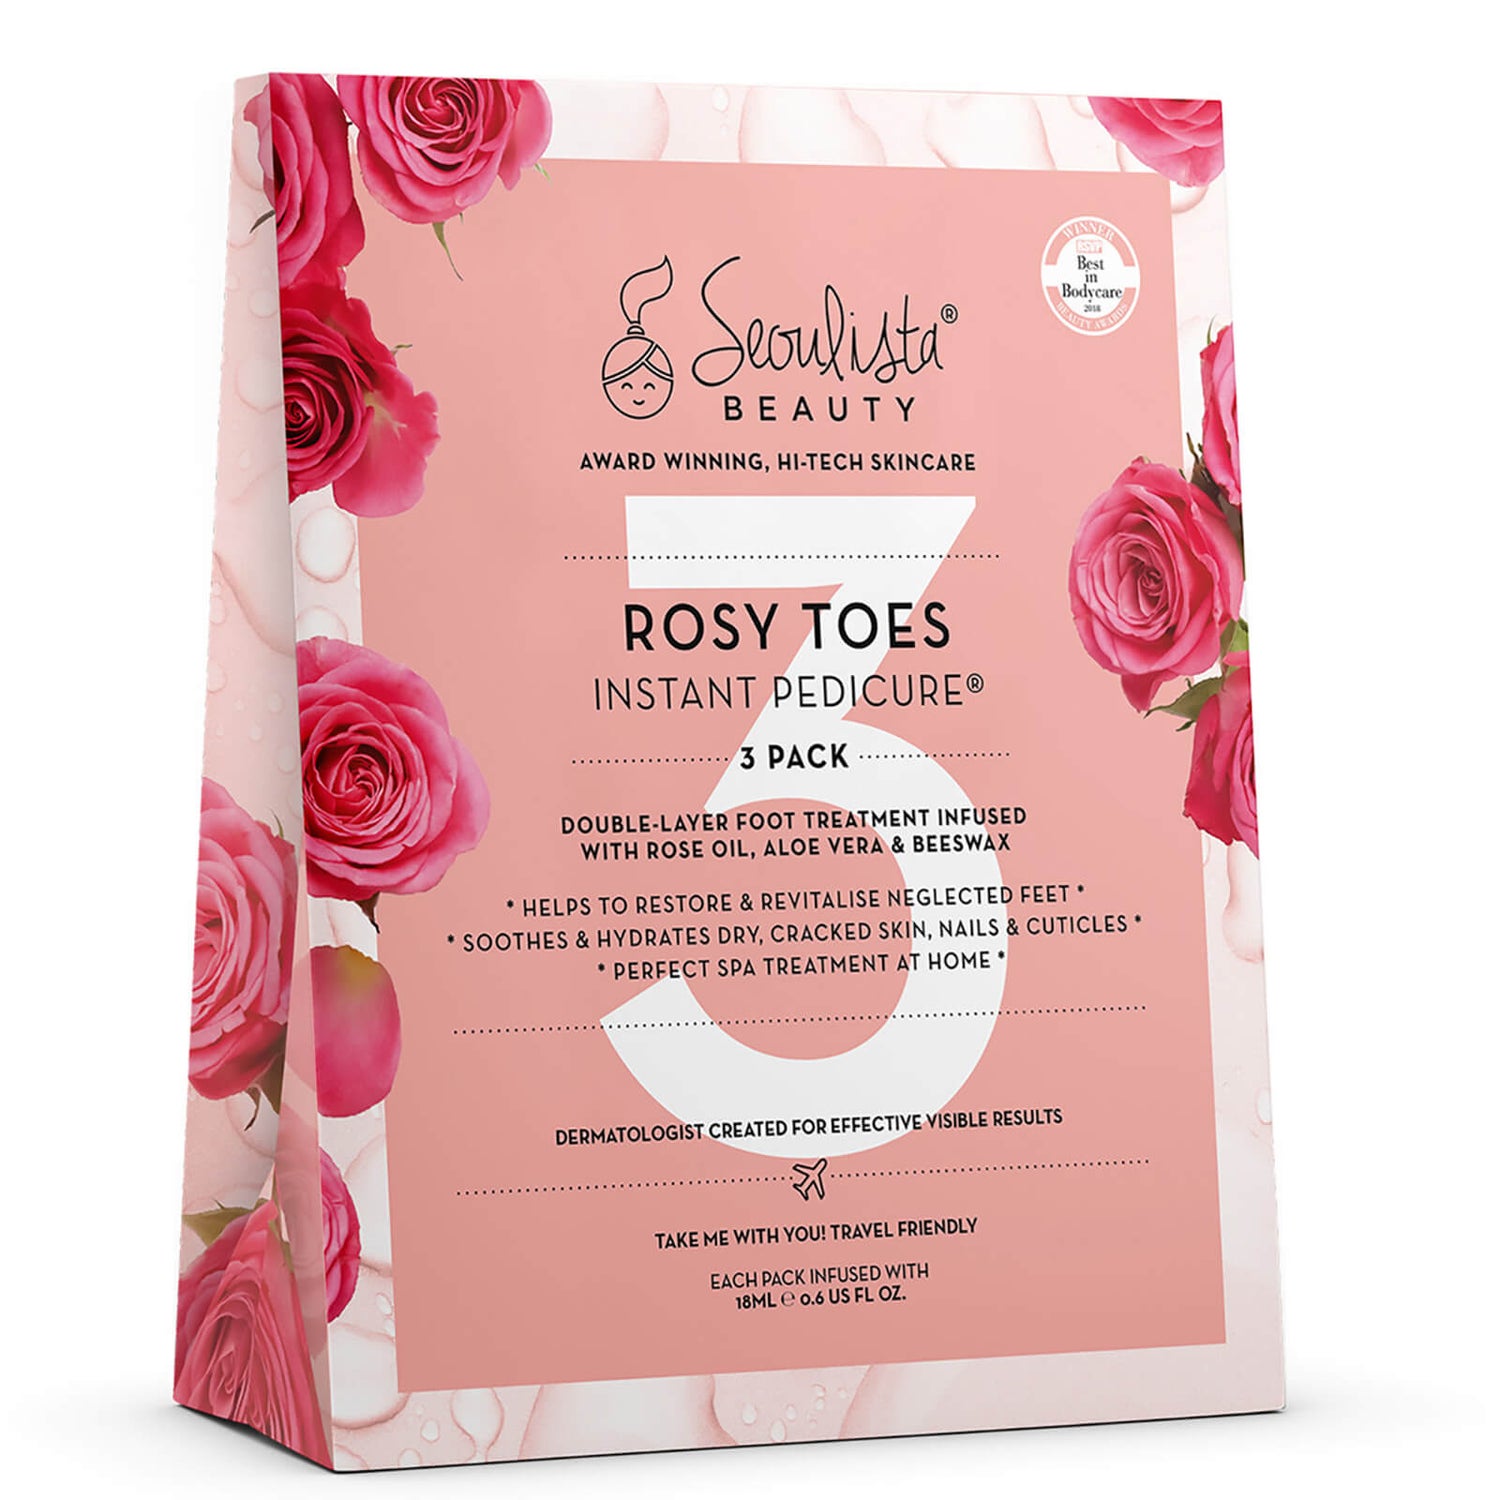 Seoulista Beauty Rosy Toes Instant Pedicure Multi Pack 3's (Worth $32)